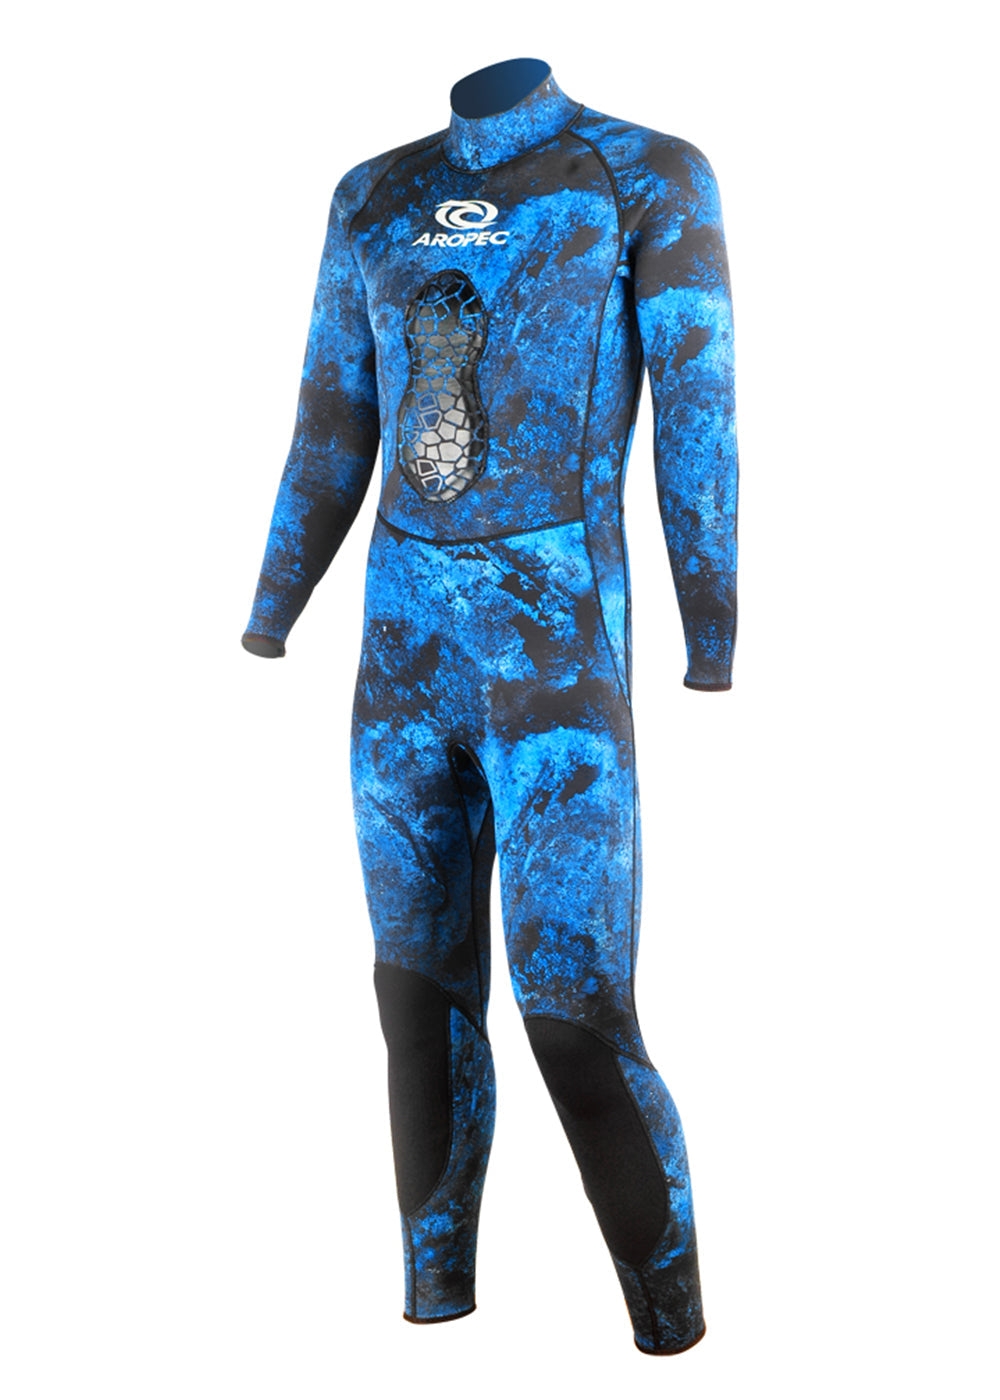 Aropec Azul 2mm Spearfishing Wetsuit - Adreno - Ocean Outfitters